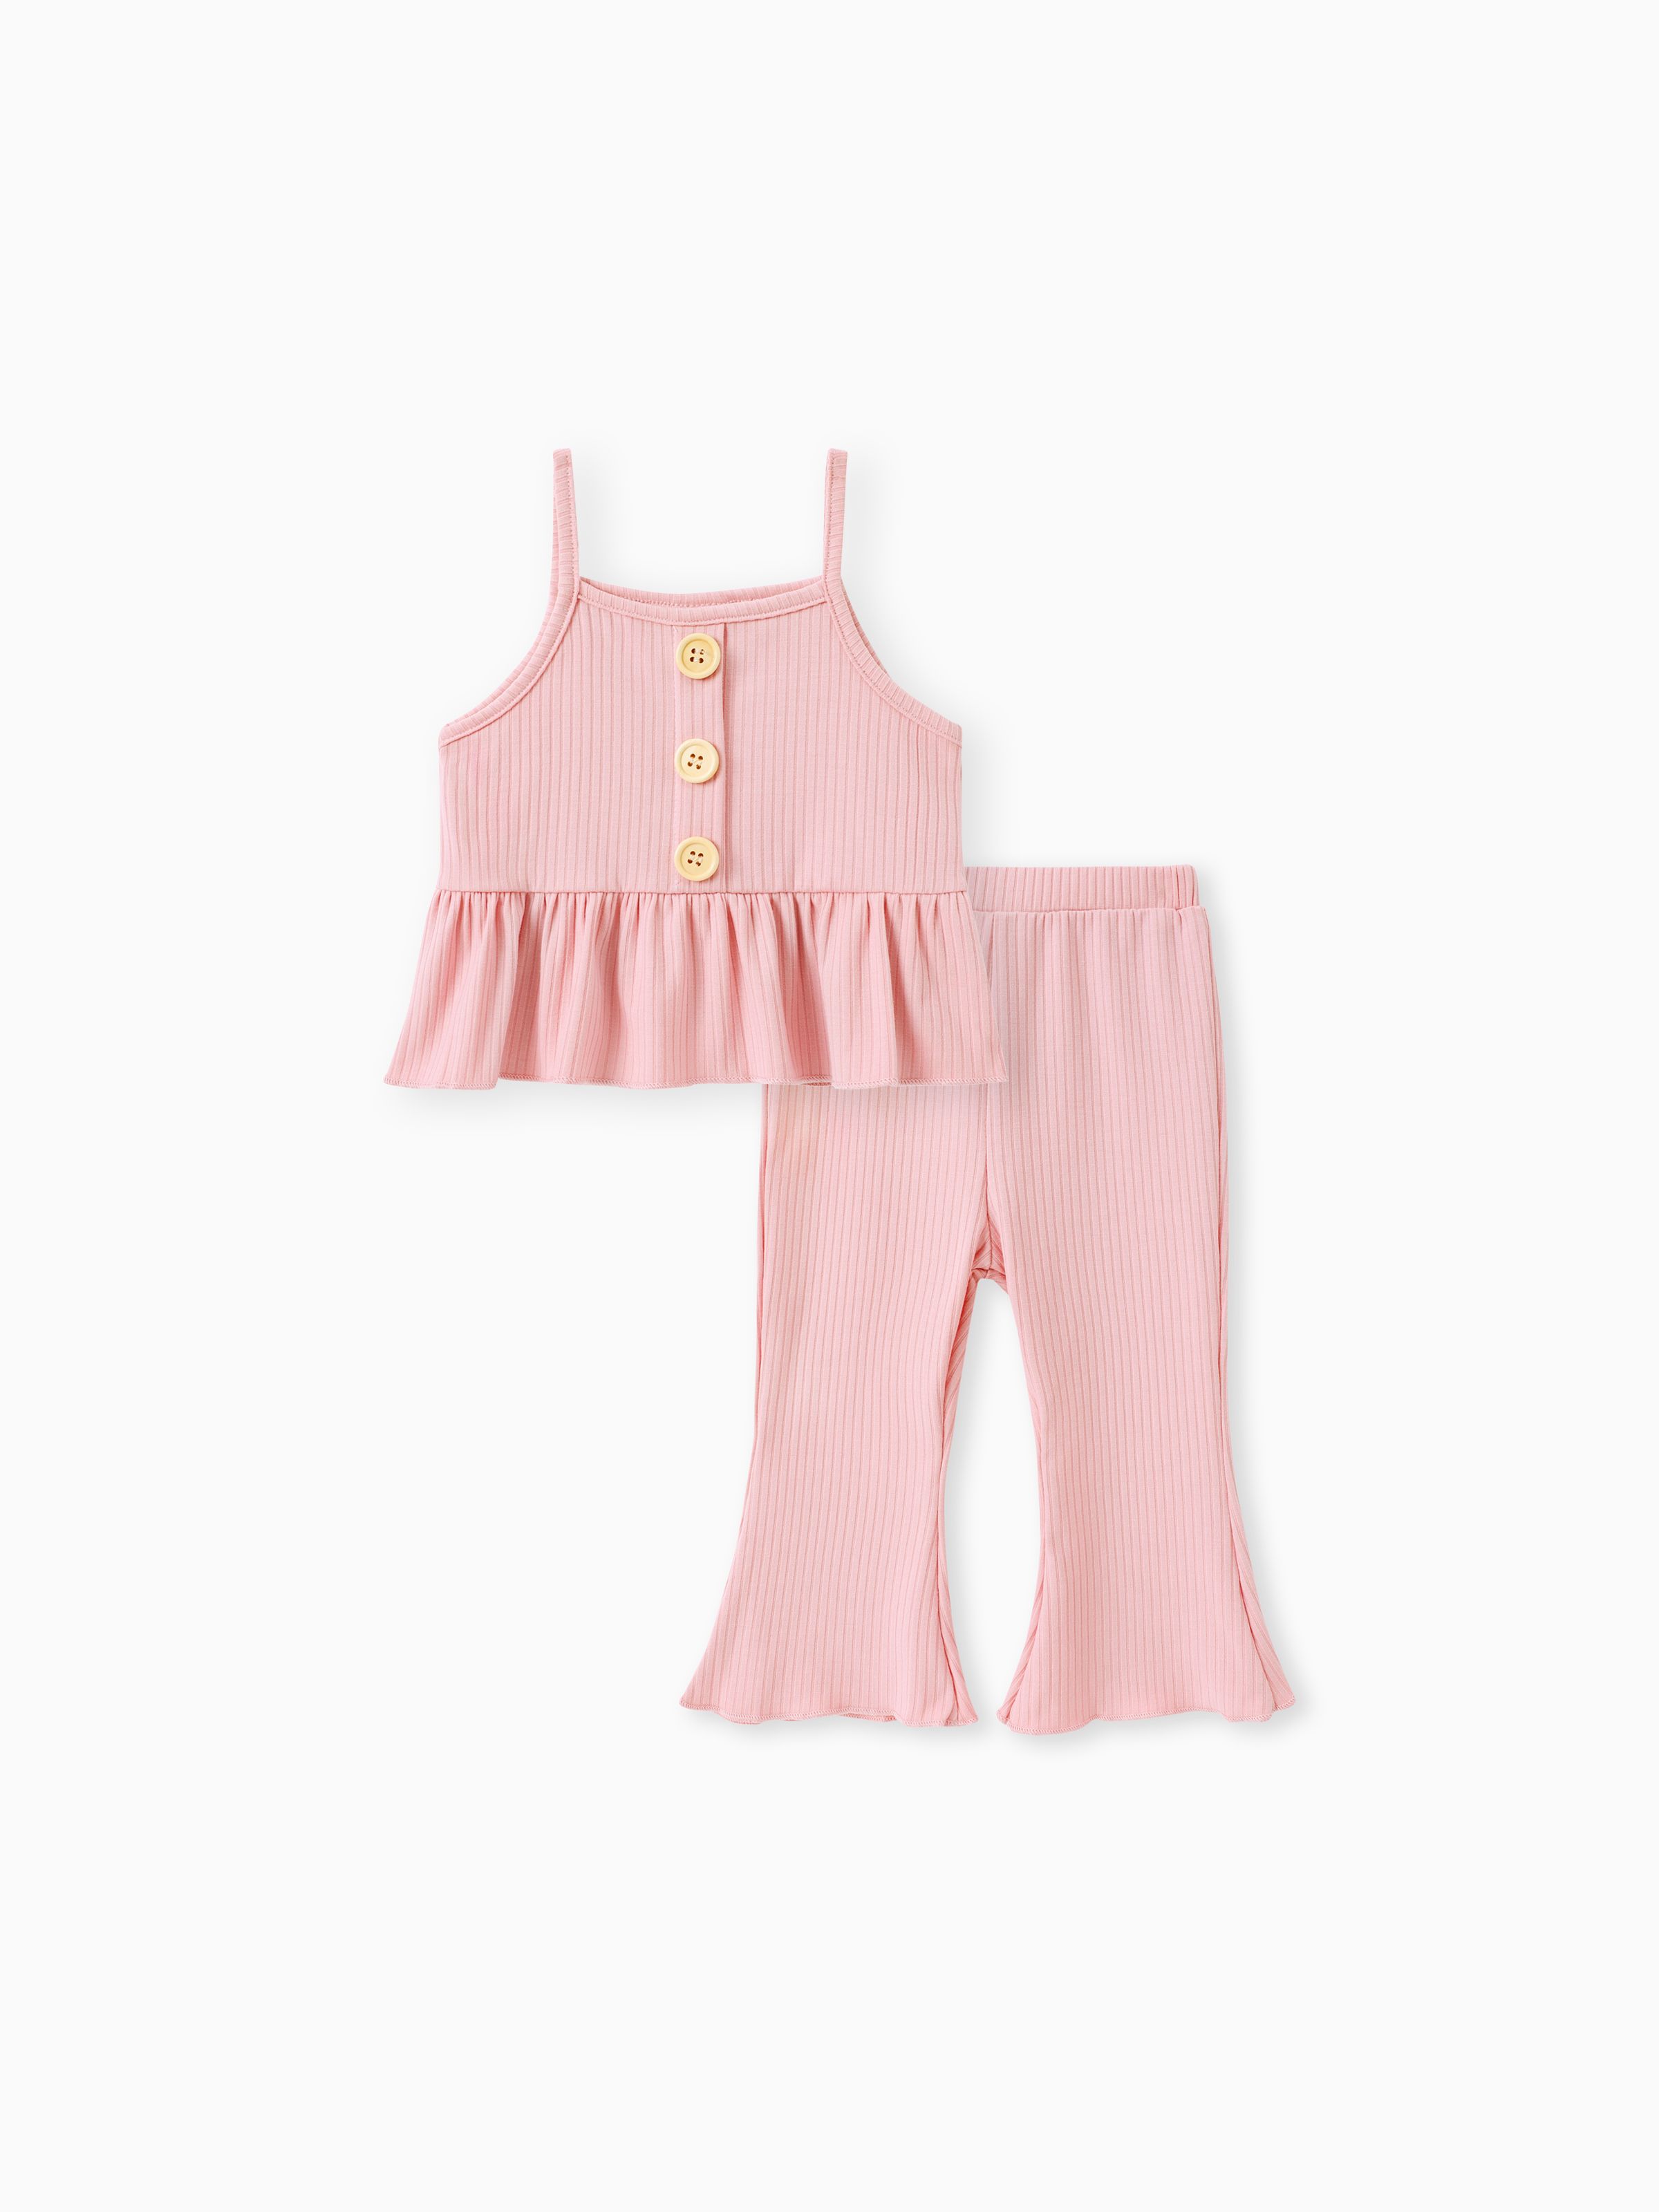 

2pcs Baby Girl Solid Spaghetti Strap Peplum Top and Flared Pants Set